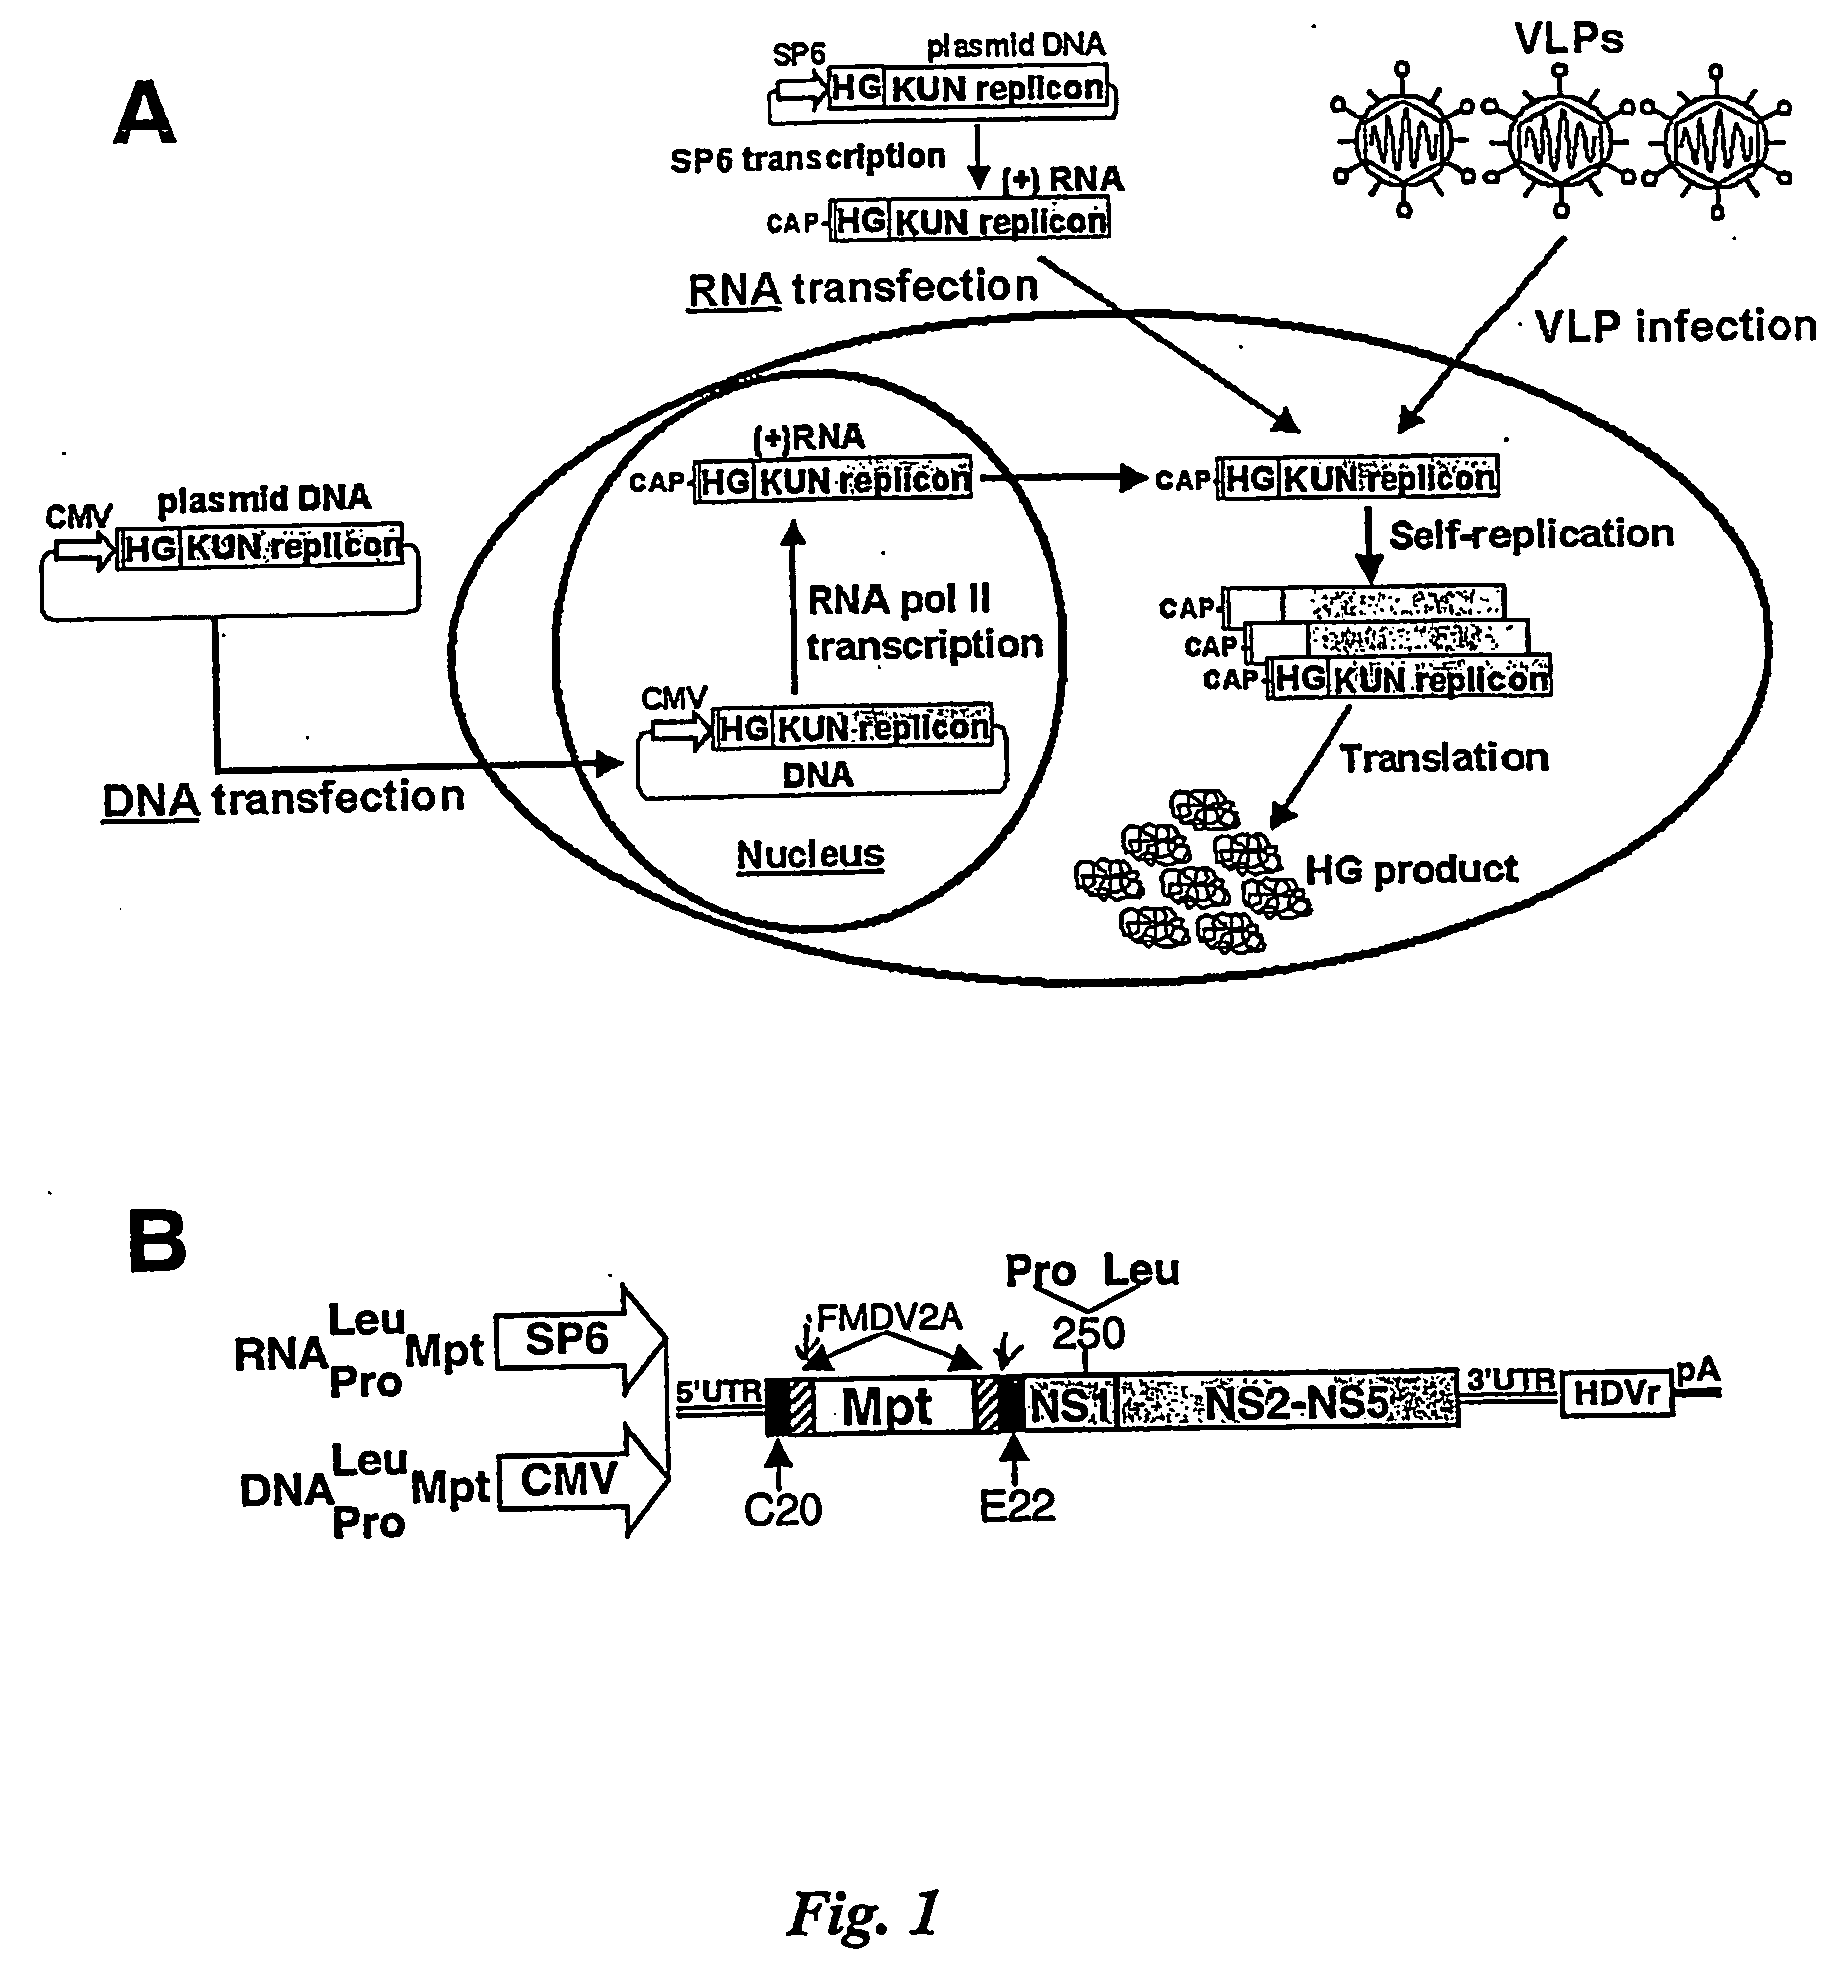 Flavivirus vaccine delivery system